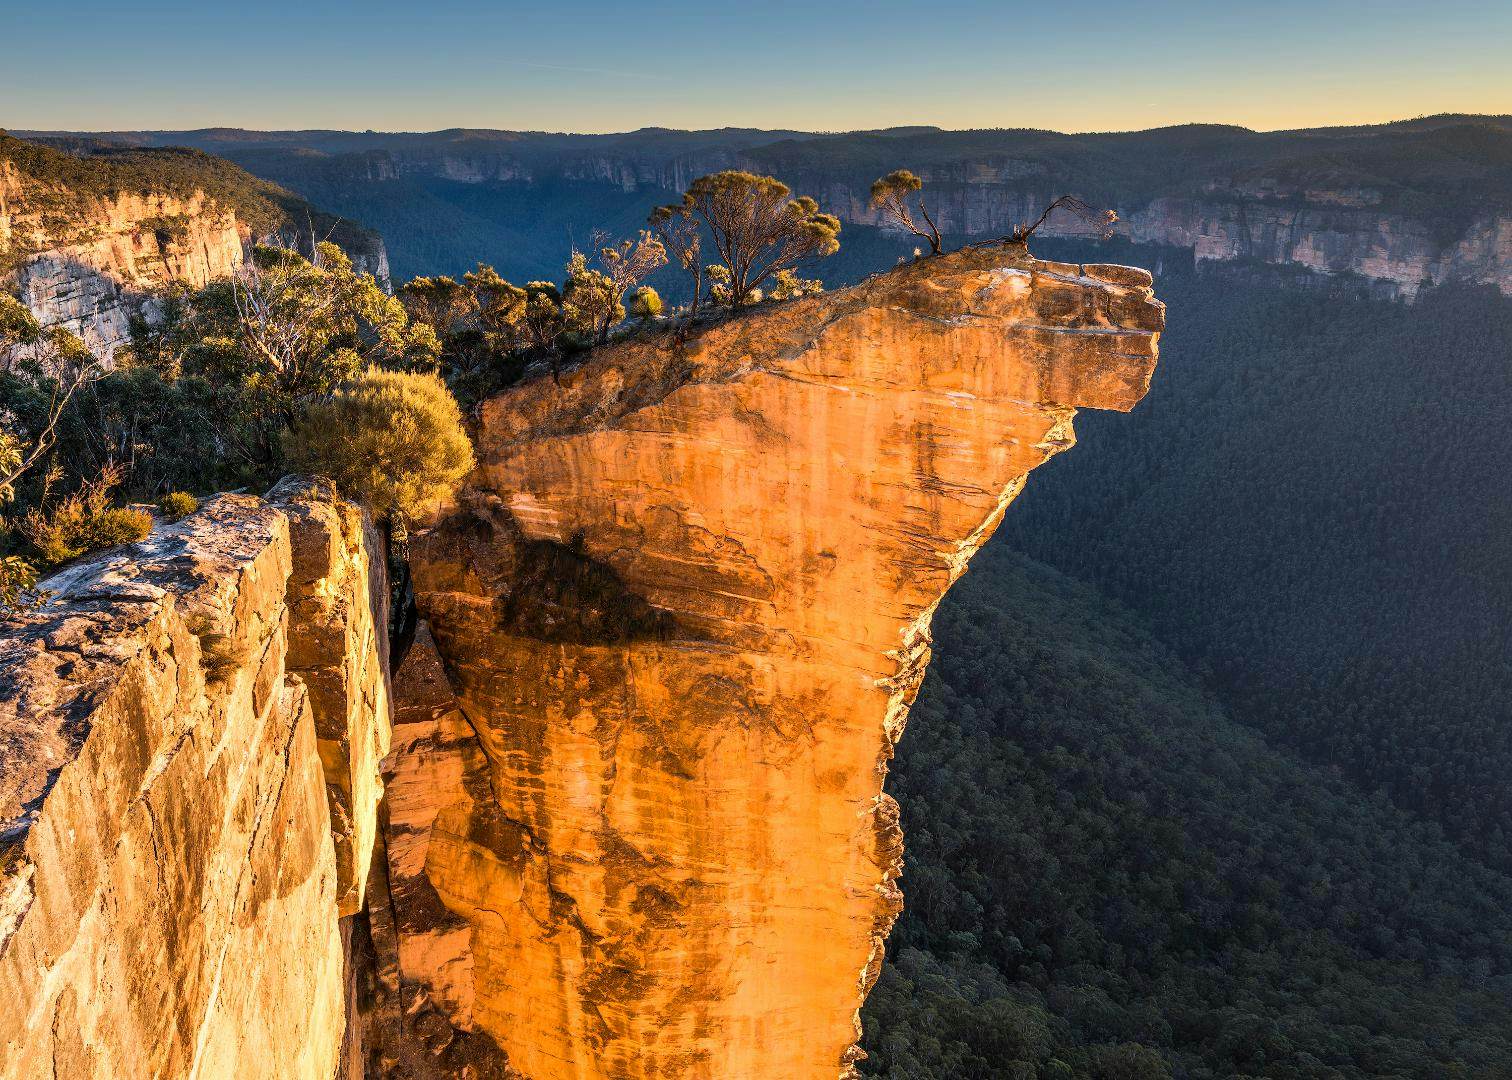 Introducing Australia - Lonely Planet Video